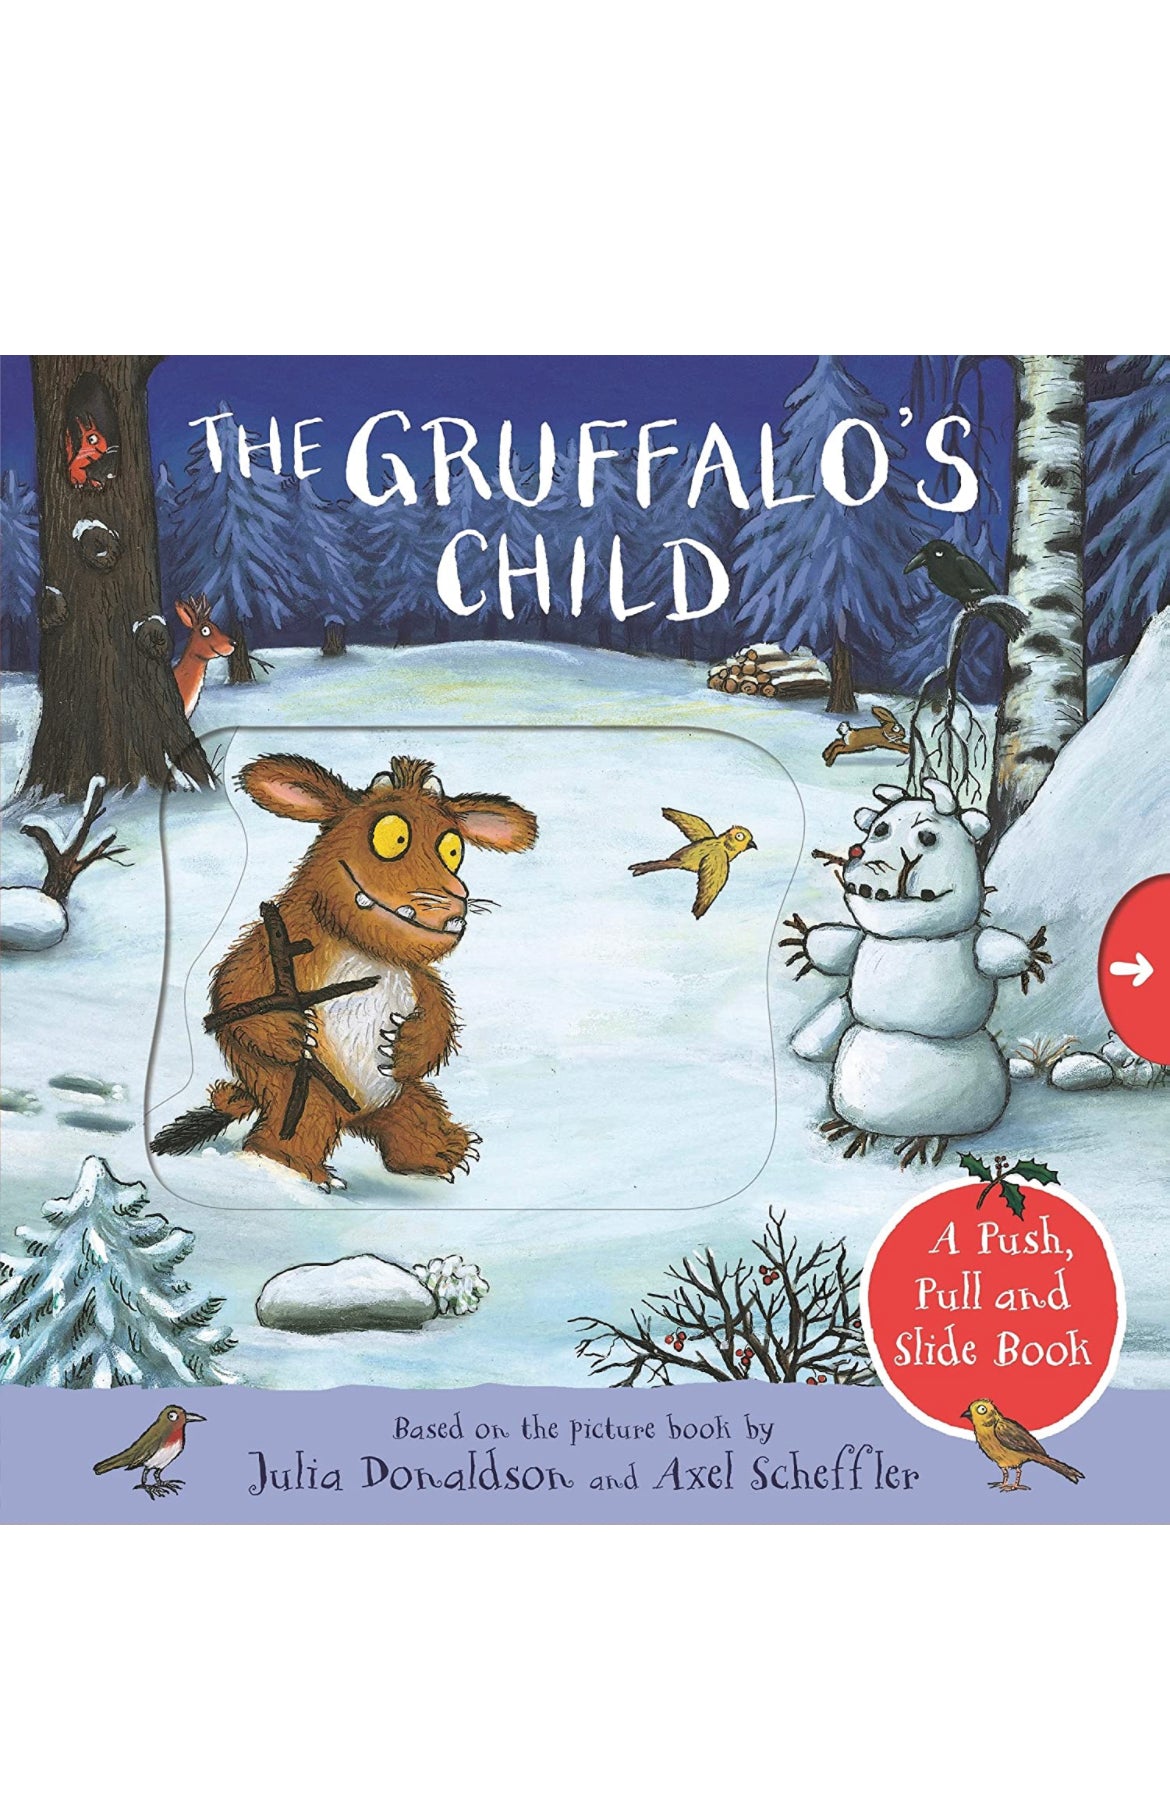 The Gruffalo's Child A Push, Pull and Slide Book.